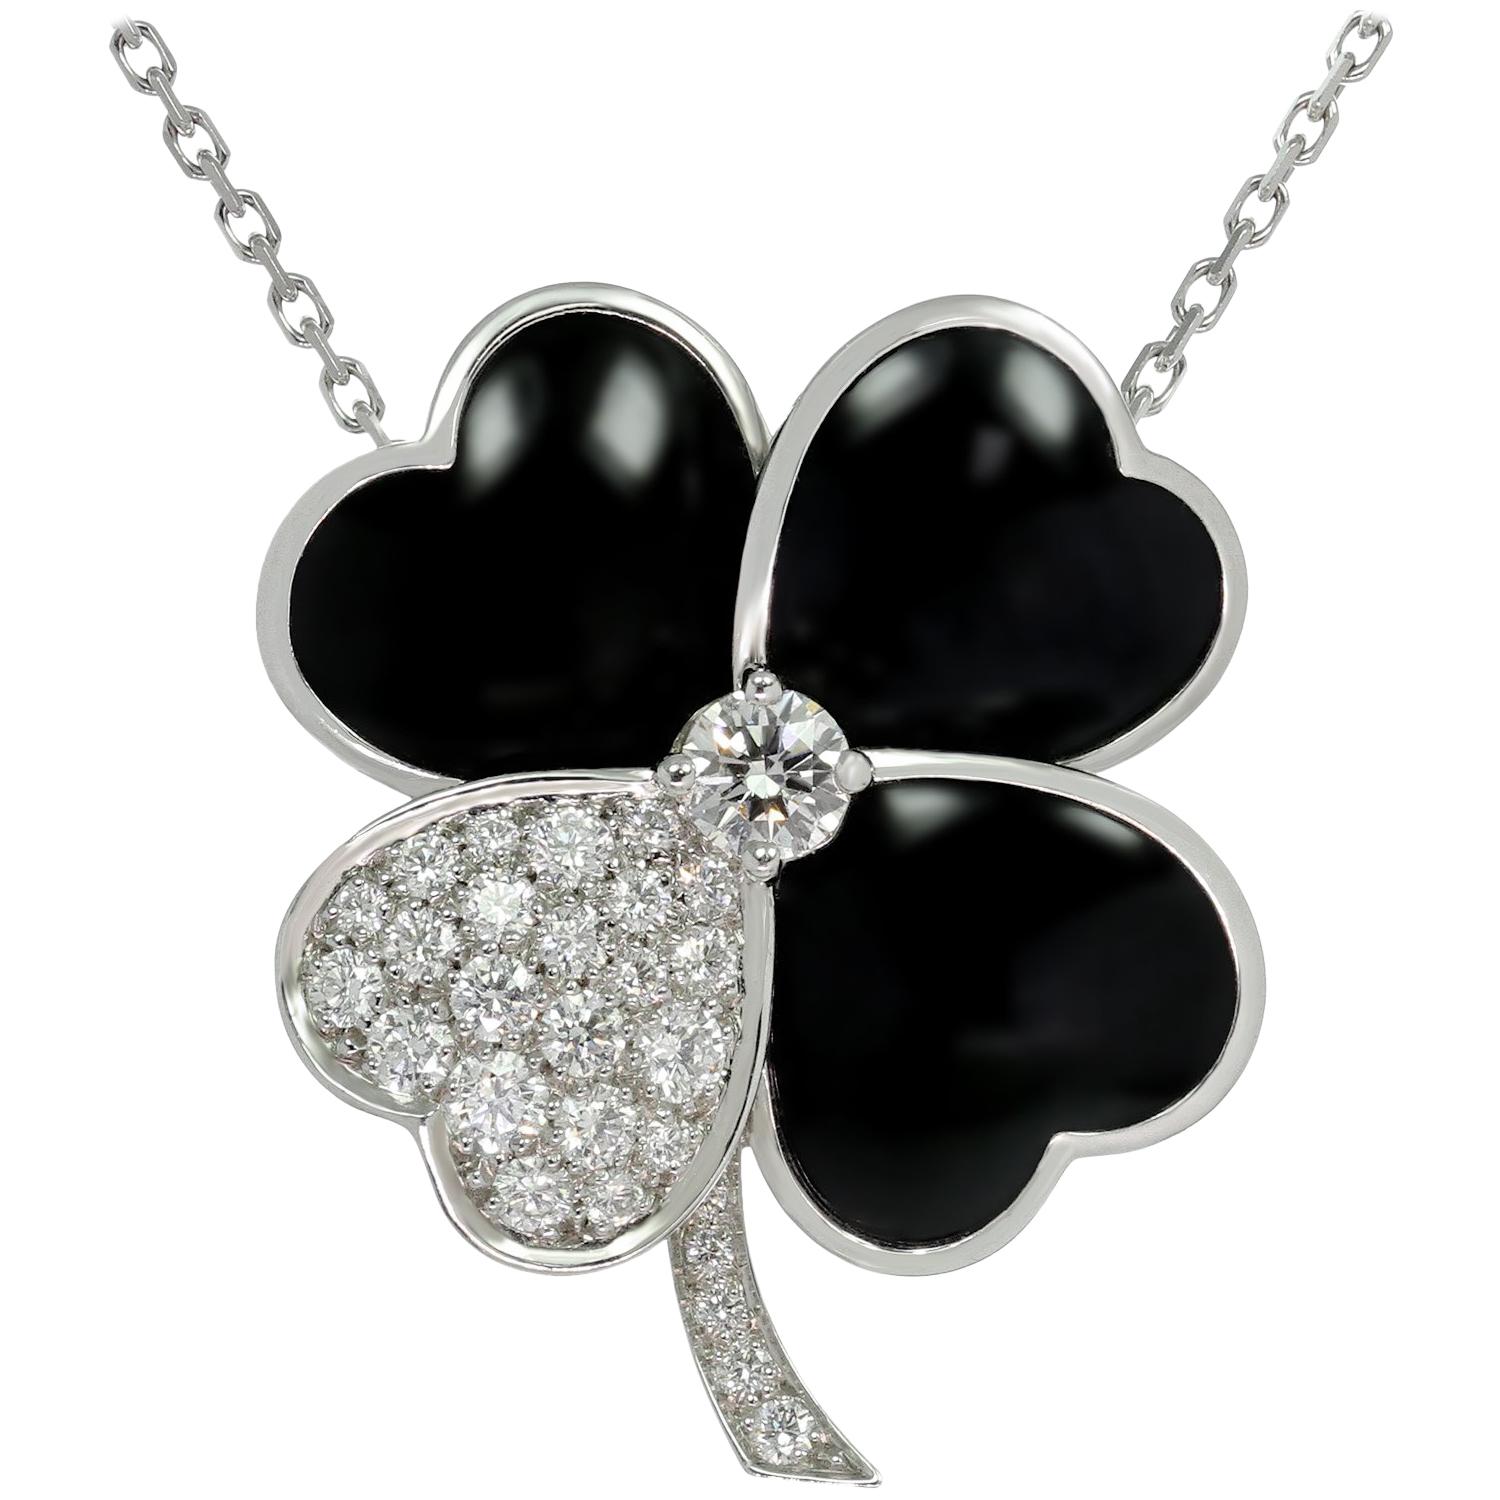 Van Cleef & Arpels Cosmos Large Onyx Diamond White Gold Brooch Pendant Necklace